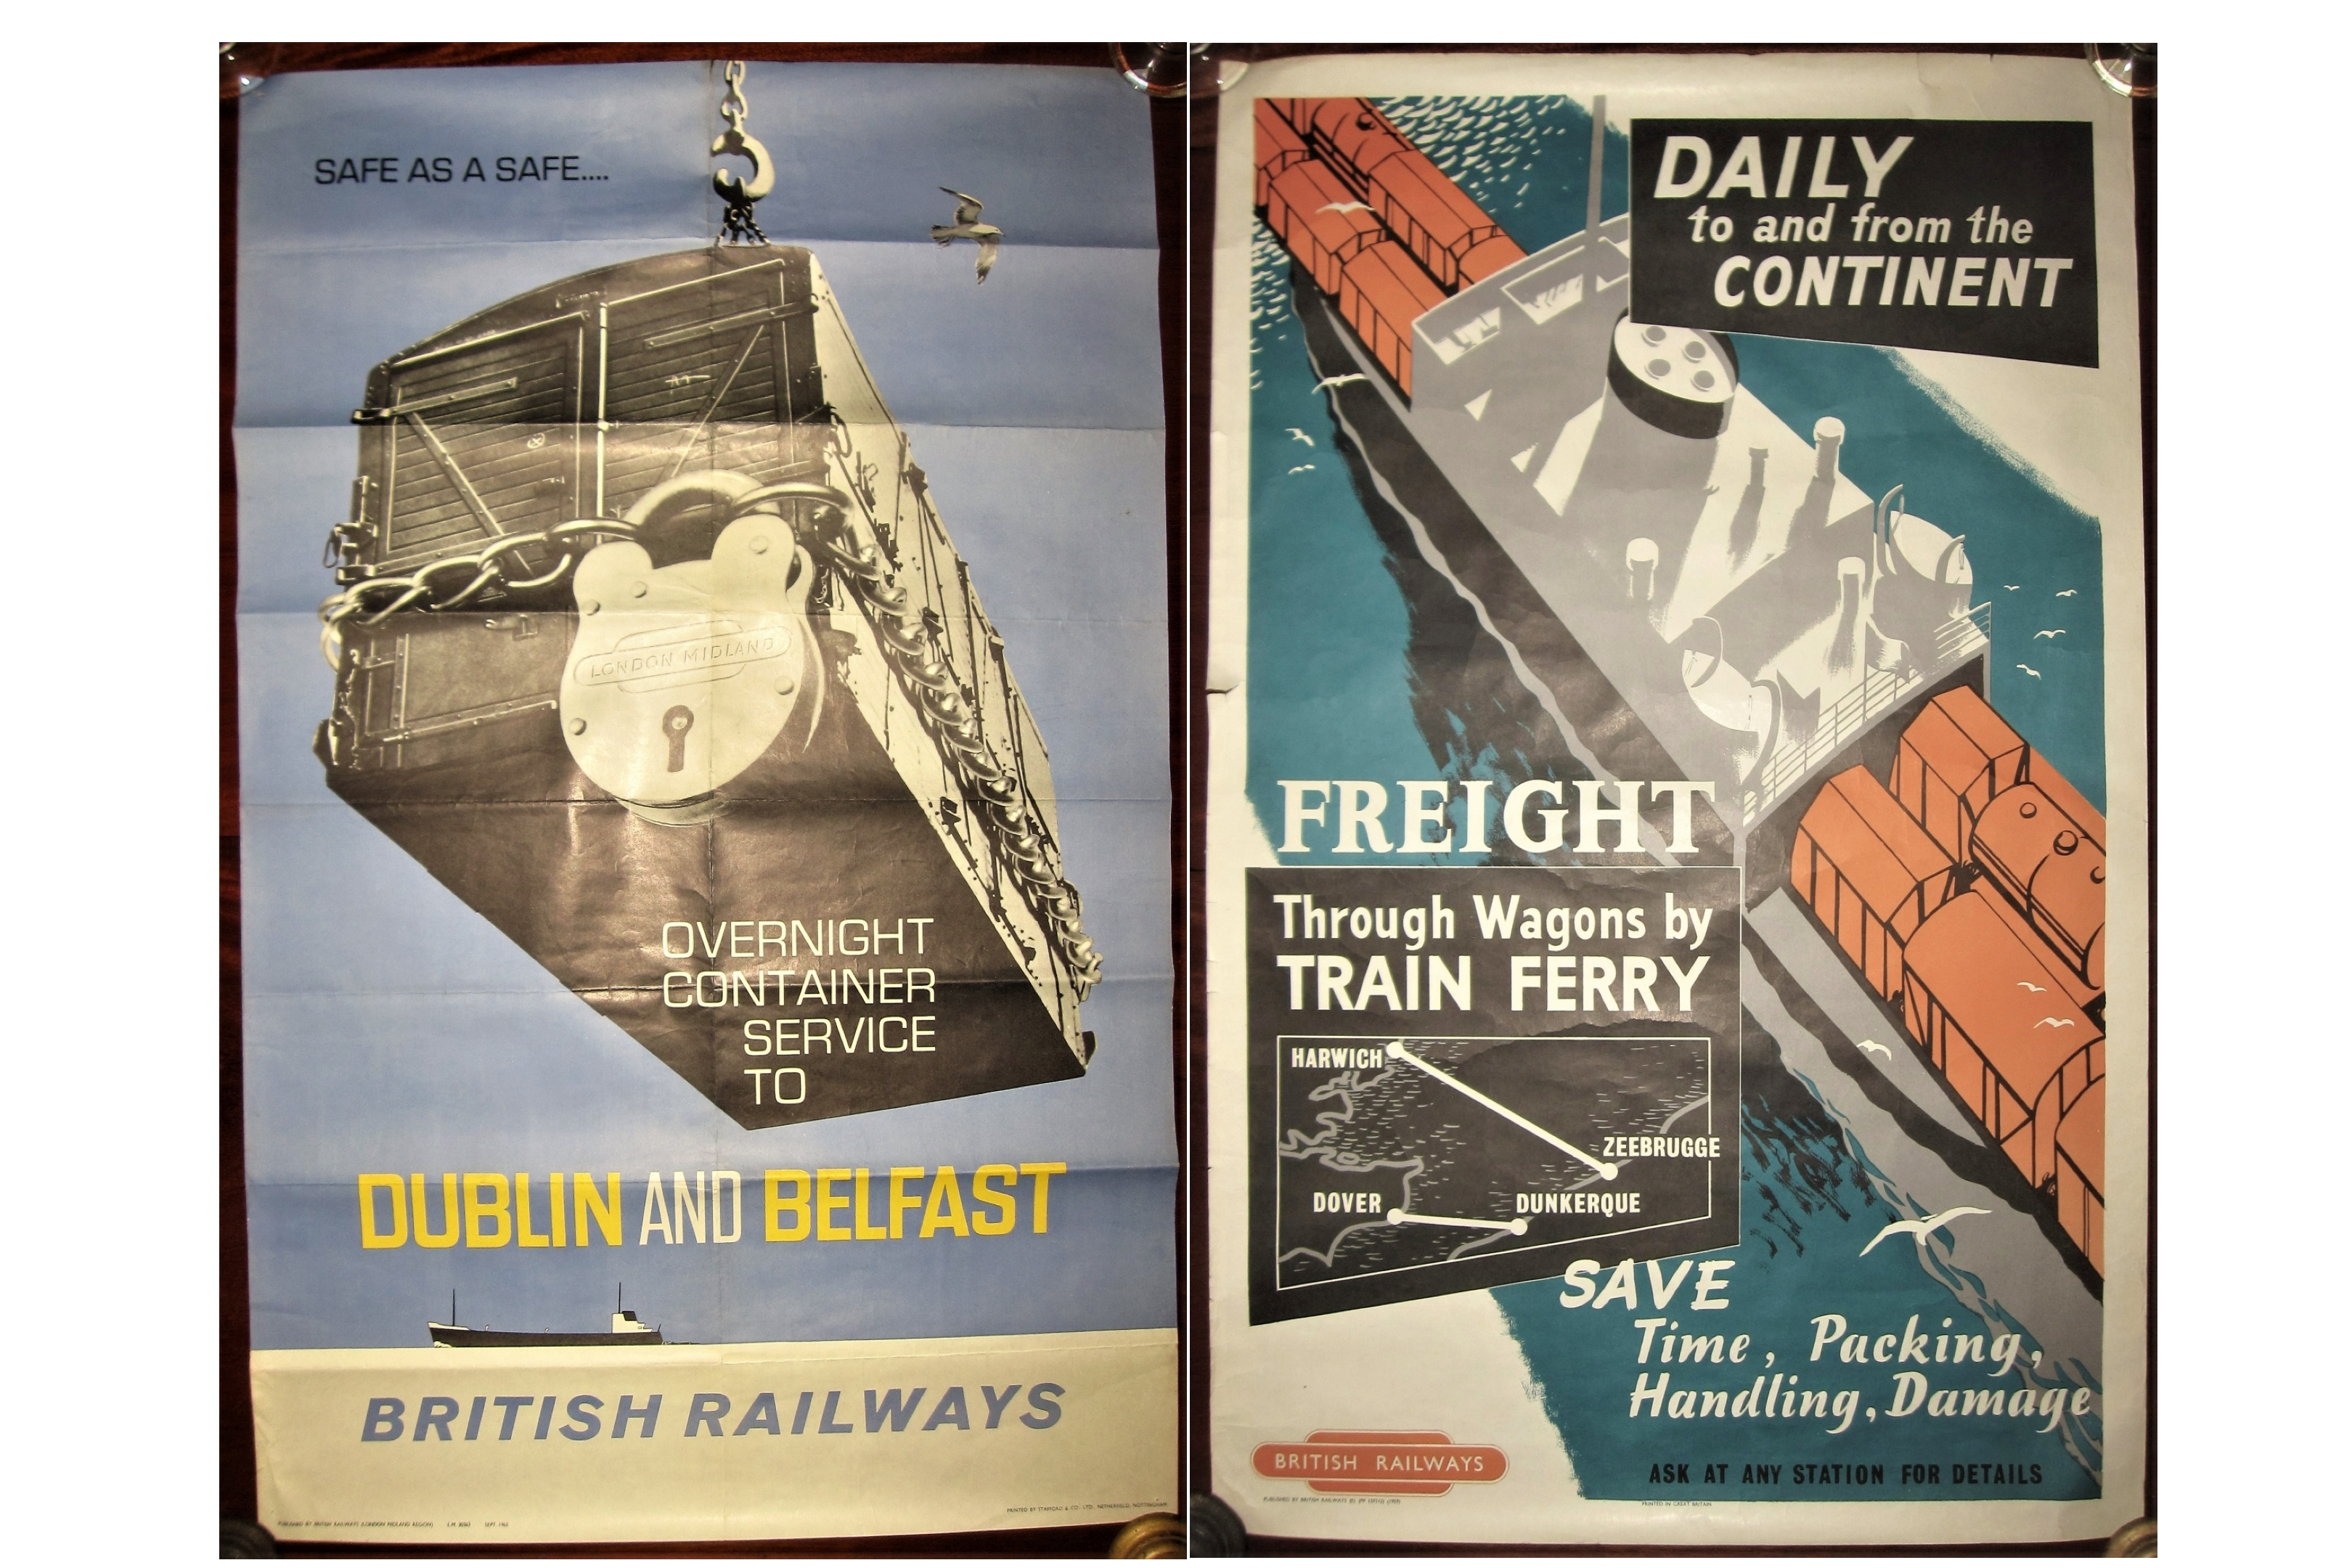 Goods Service Poster. OVERNIGHT CONTAINER SERVICE TO DUBLIN and BELFAST.